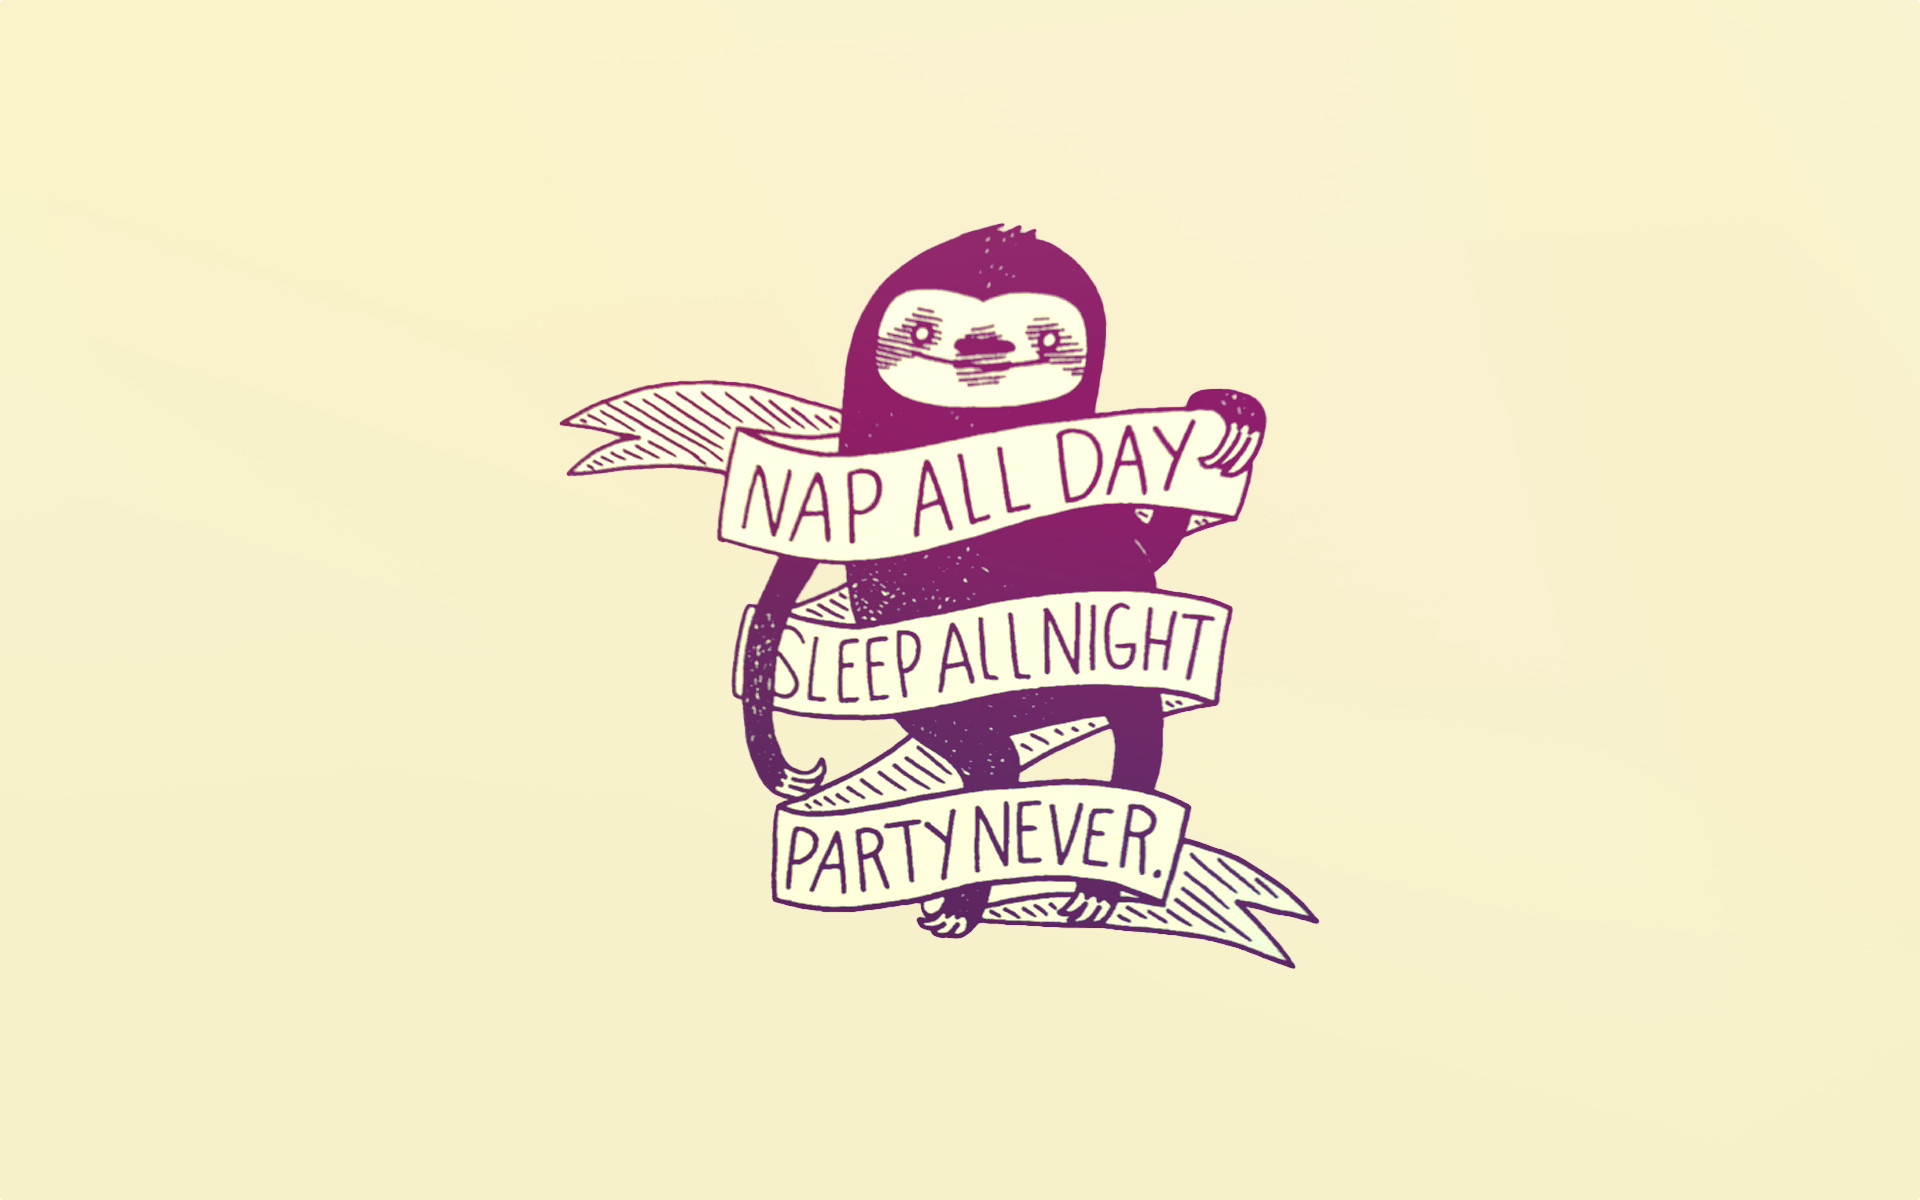 1920x1200 Made a wallpaper out of "Nap all day" sloth ...